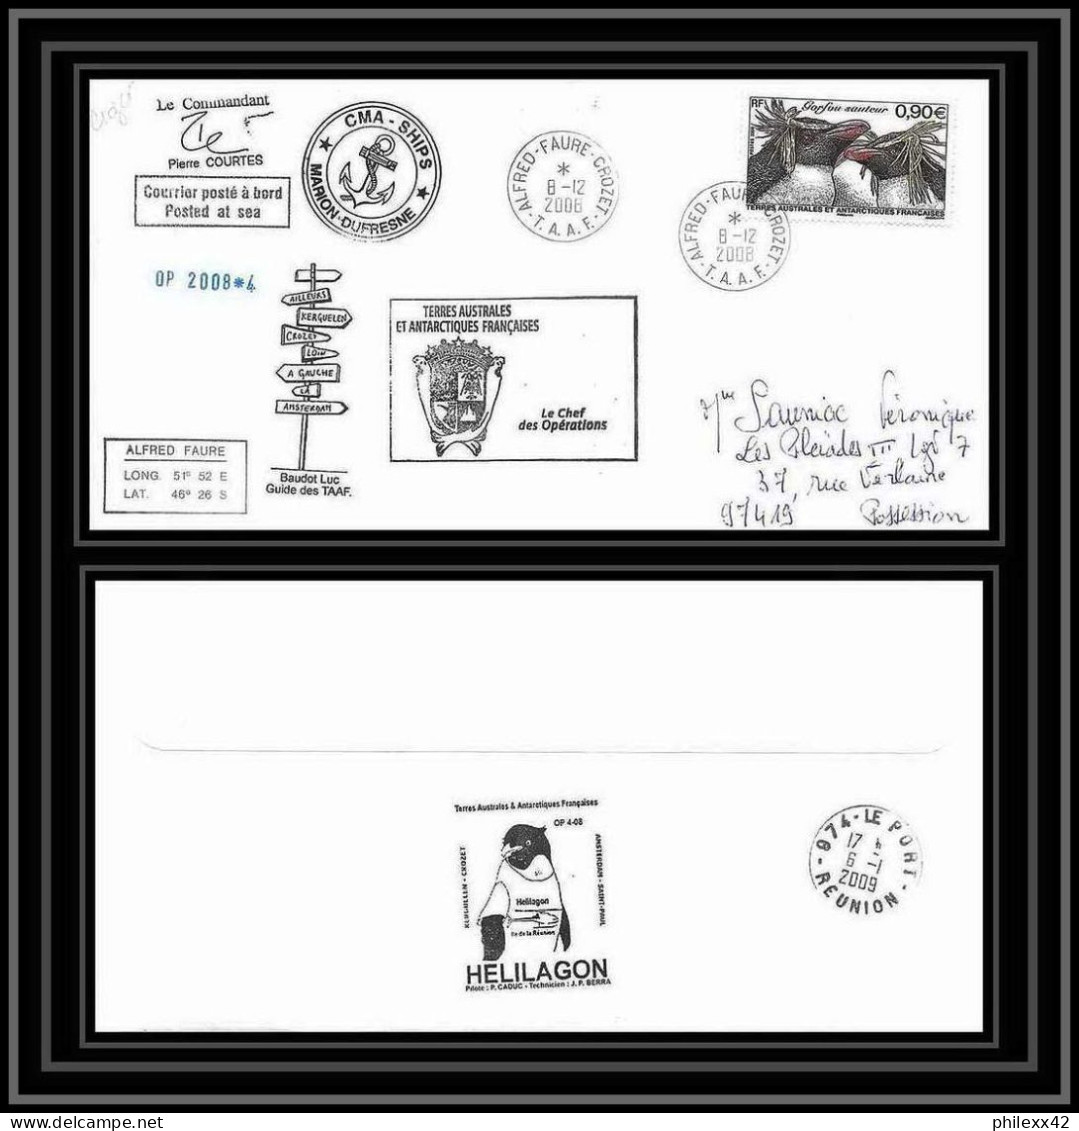 2862 ANTARCTIC Terres Australes TAAF Helilagon Lettre Cover Dufresne Signé Signed Op 2008/4 Crozet 8/12/2008 N°502 - Hélicoptères